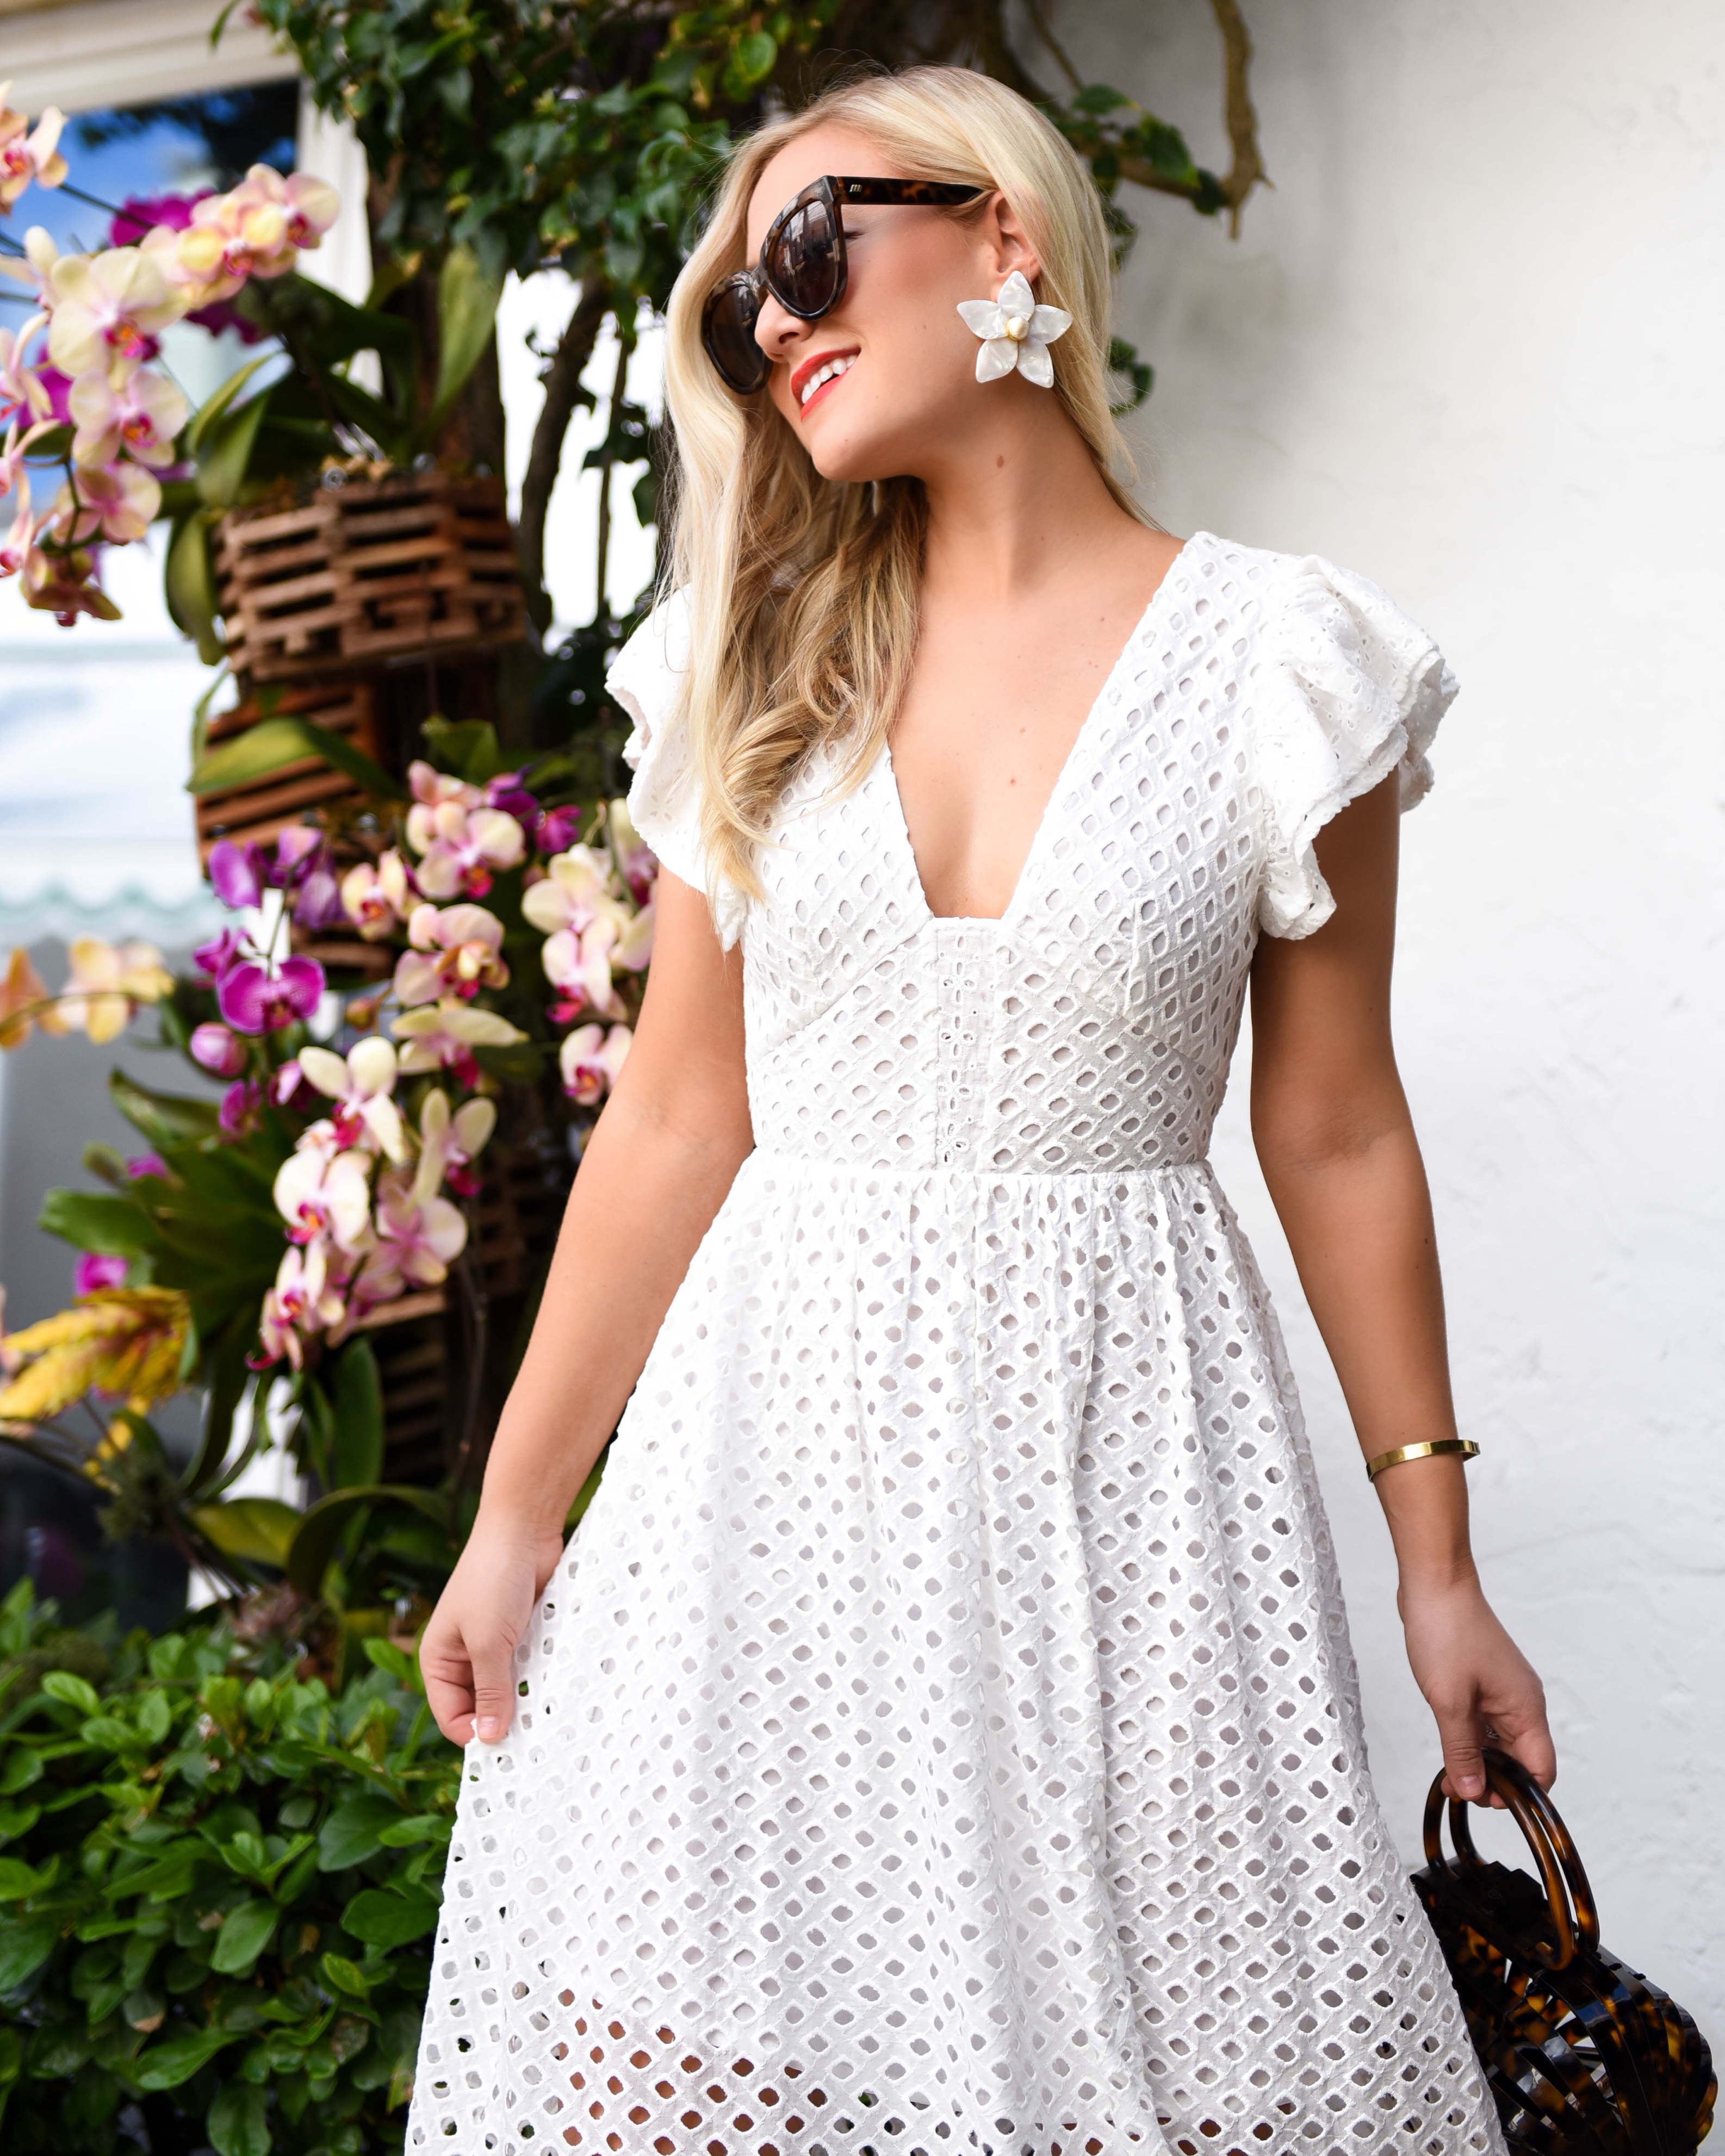 Endless Rose, Eyelet Fit-and-Flare Midi Dress, Bloomingdales, Cult Gaia Bag, BaubleBar Flower Earrings, Schutz Shoes, White Dress under $100, White bridal dresses, Palm Beach, Travel Blogger, Lo Murphy, Bloomindales Dresses